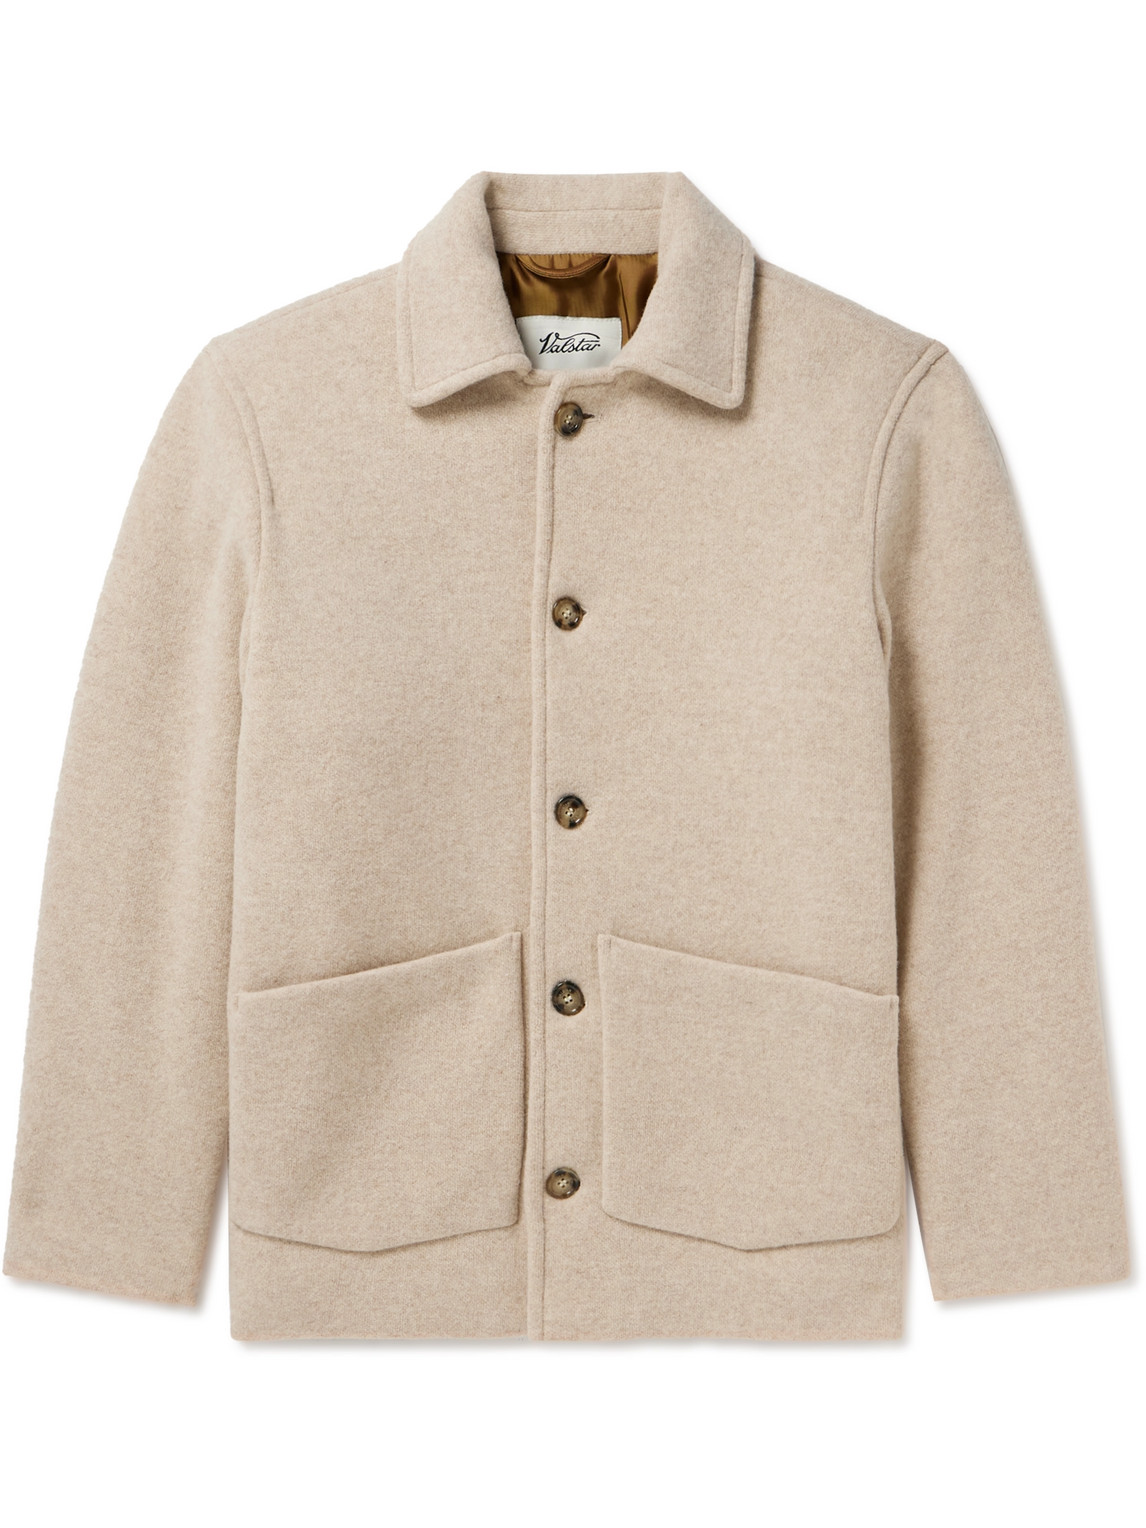 Wool and Cashmere-Blend Chore Jacket